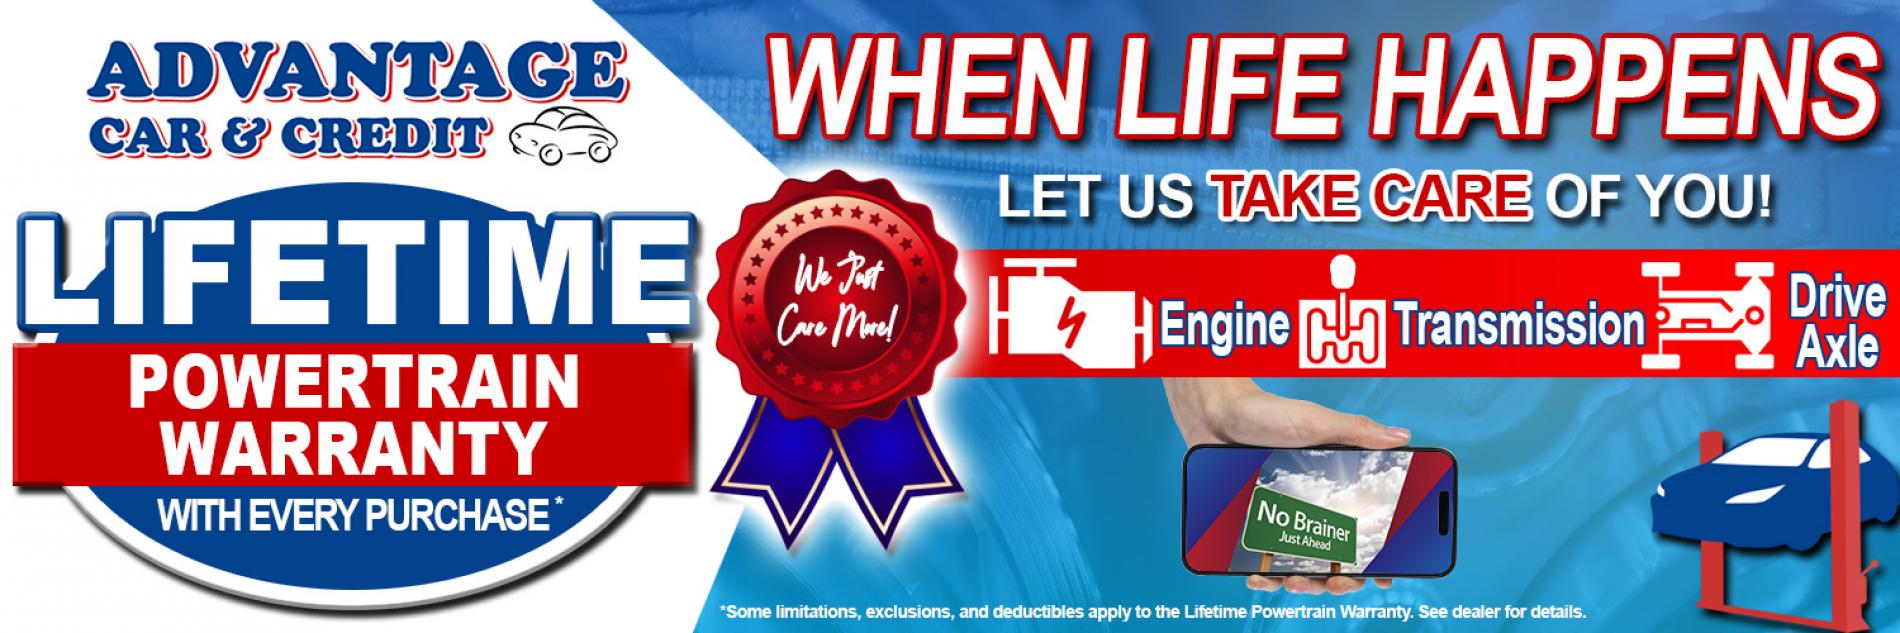 Advantage Car and Credit - Lifetime Powertrain Warranty with Every Purchase*